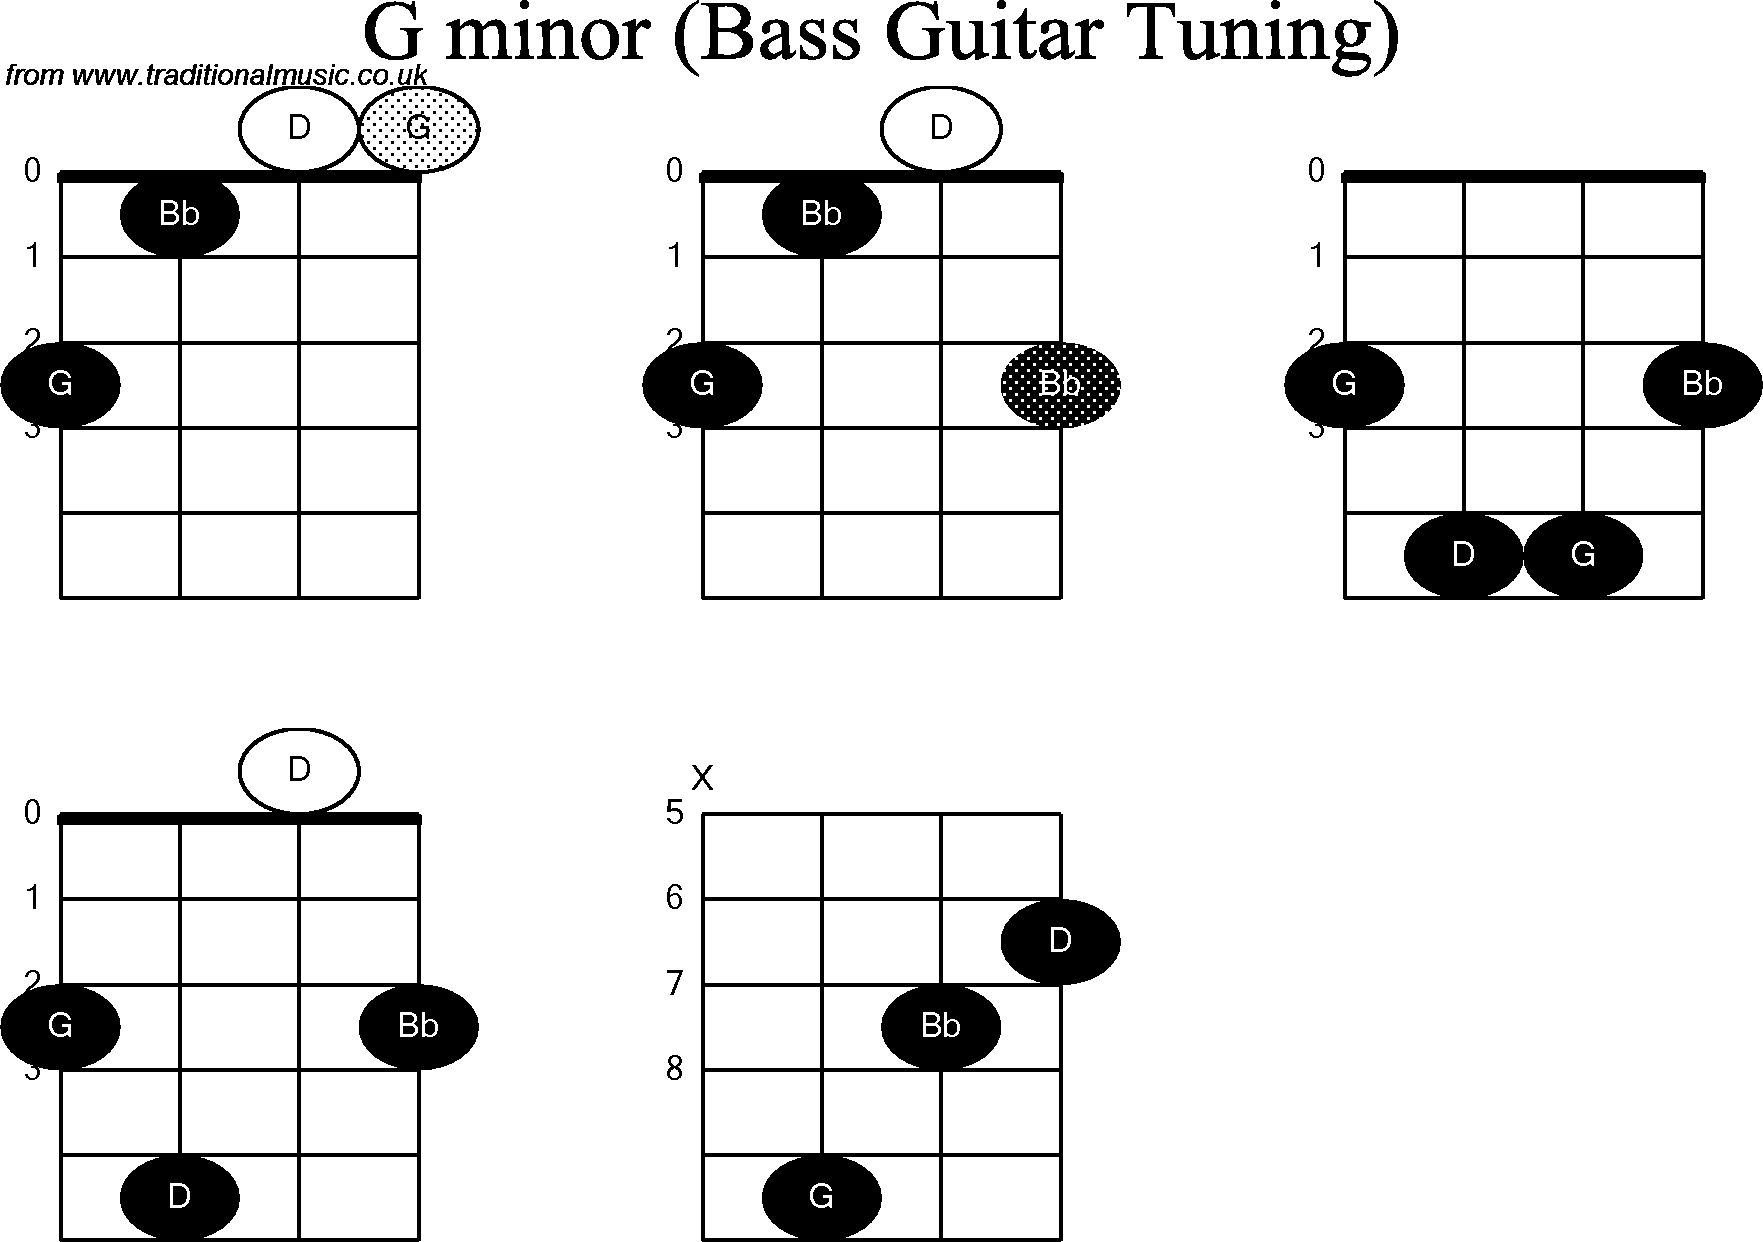 Bass Guitar chord charts for: G Minor